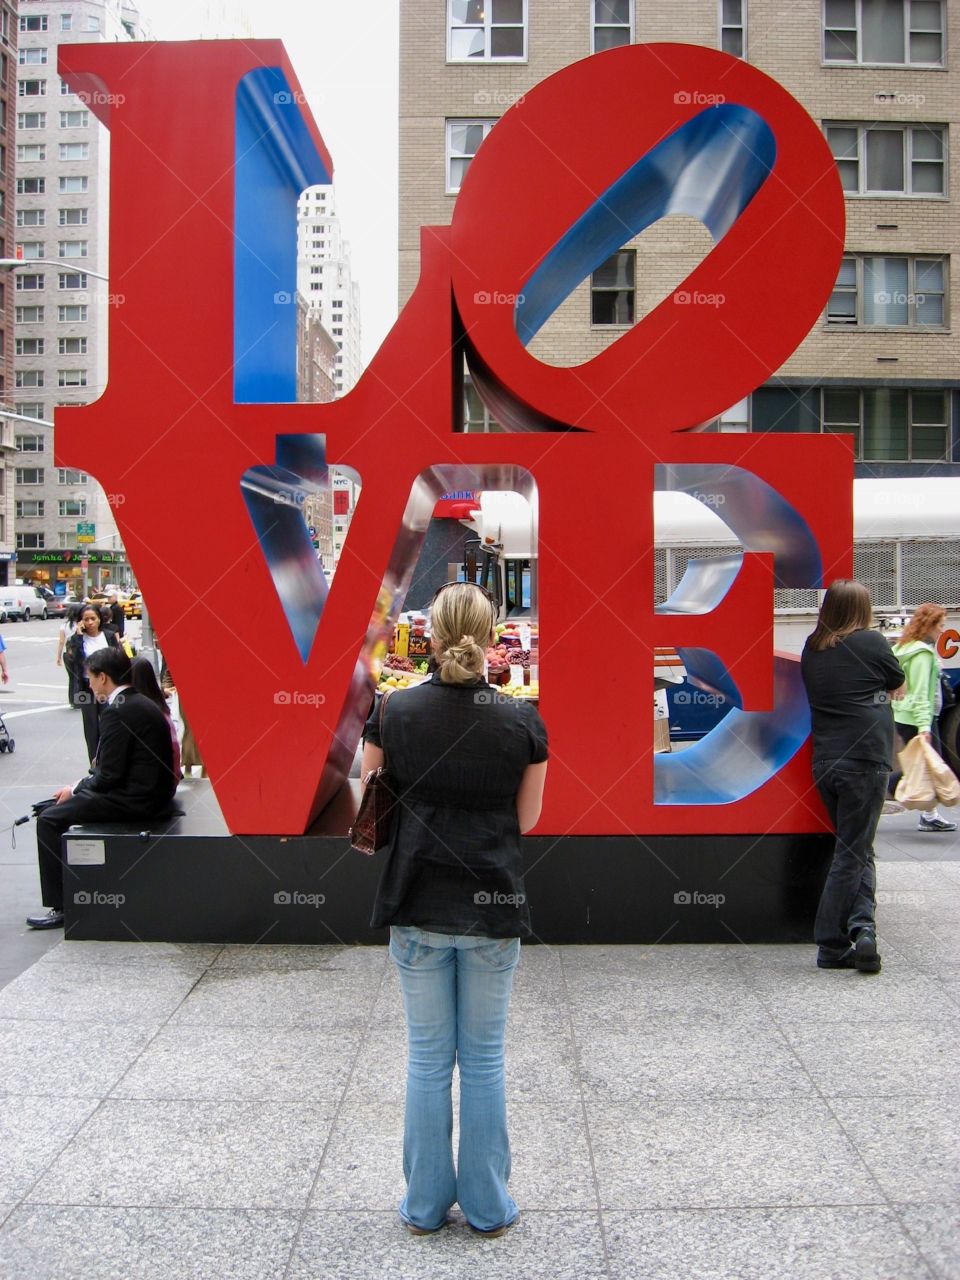  A woman contemplating what others no longer seem to realize it art. Famous ‘LOVE’ sculpture in Manhattan square.